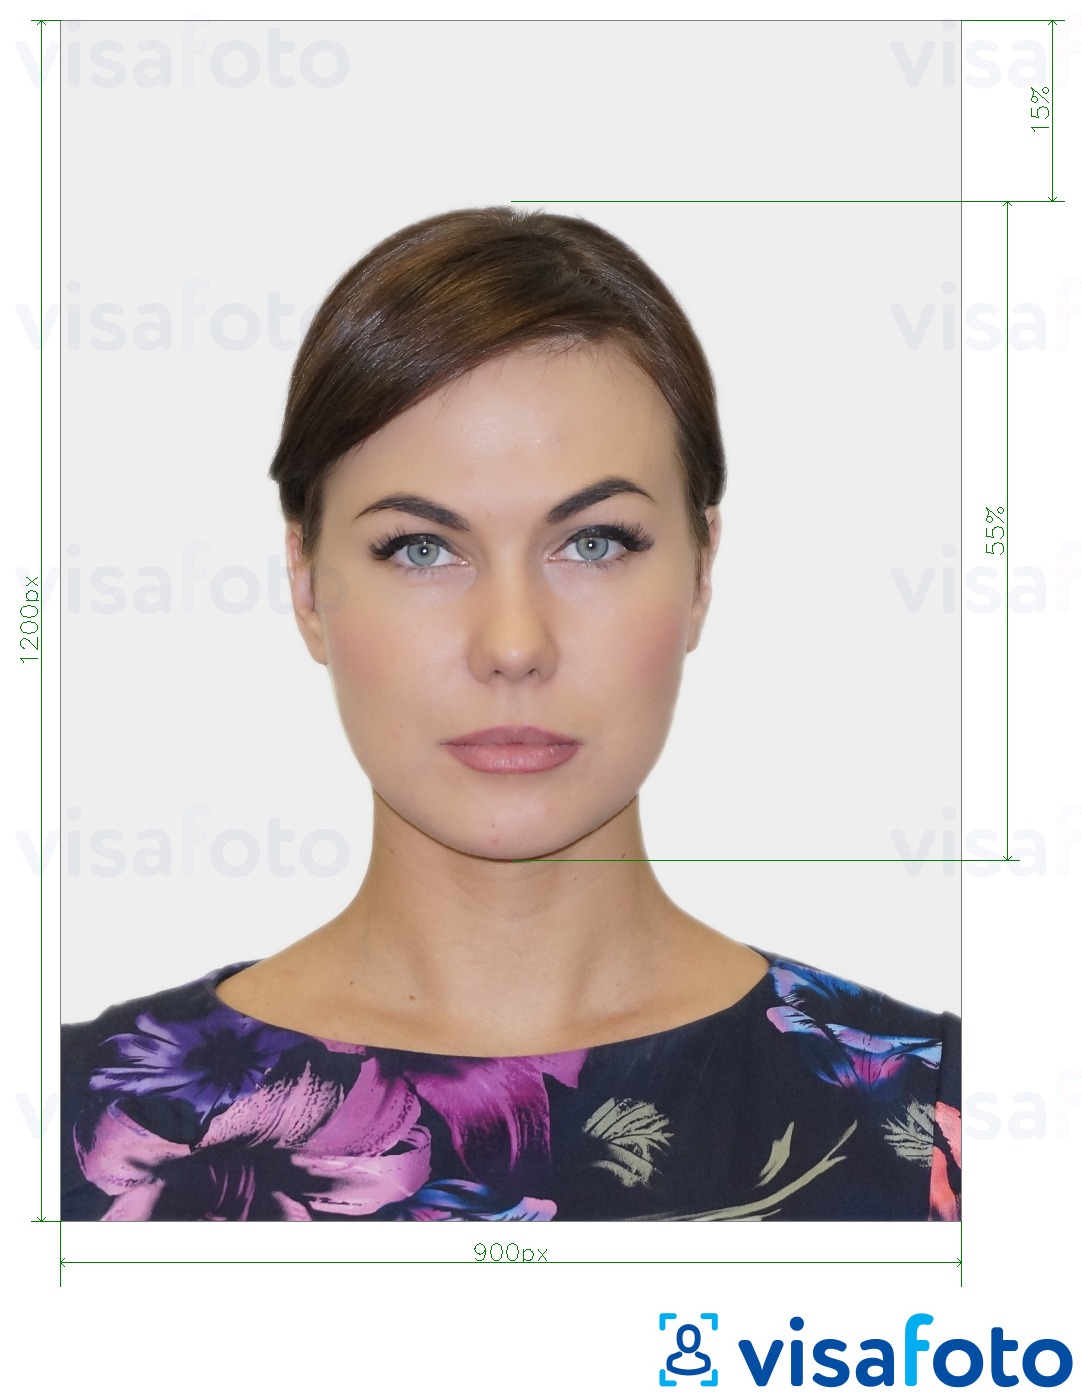 Example of photo for UK BNO passport with exact size specification